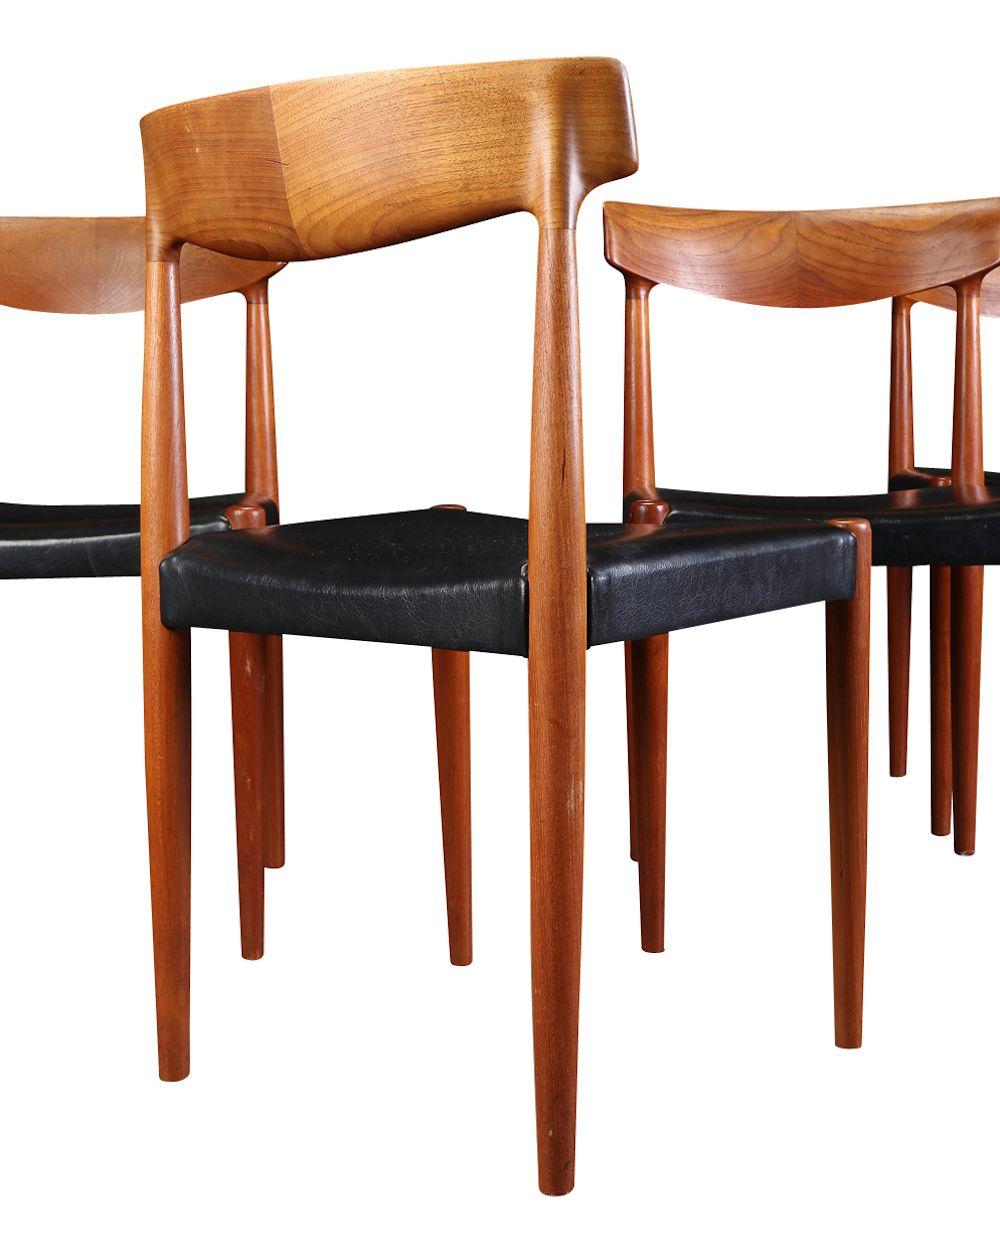 Vintage Knud Faerch Teak Dining Chairs, Set of 4 In Good Condition For Sale In Panningen, NL